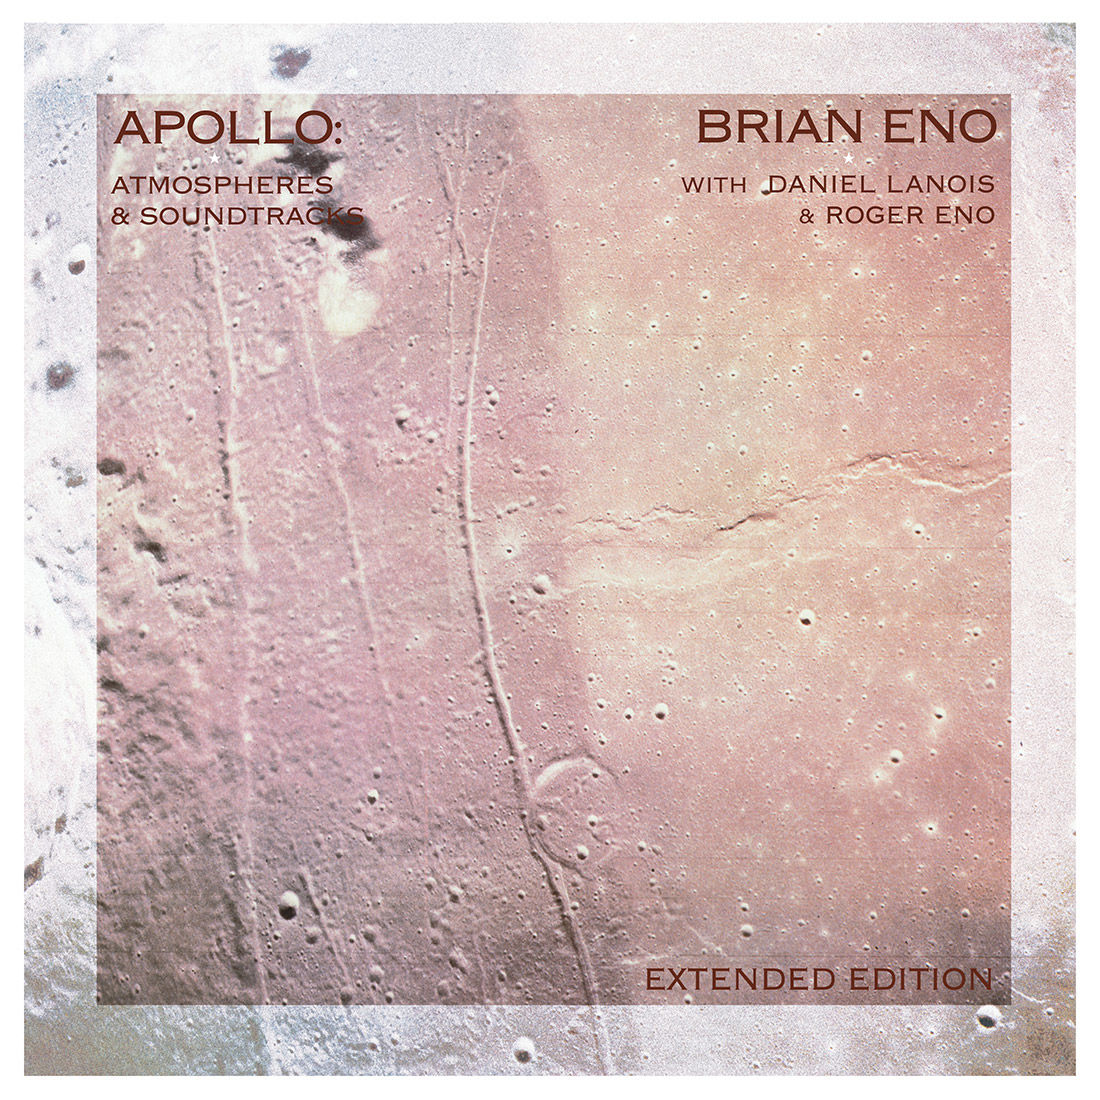 Brian Eno - Apollo - Atmospheres And Soundtracks: Extended Edition CD